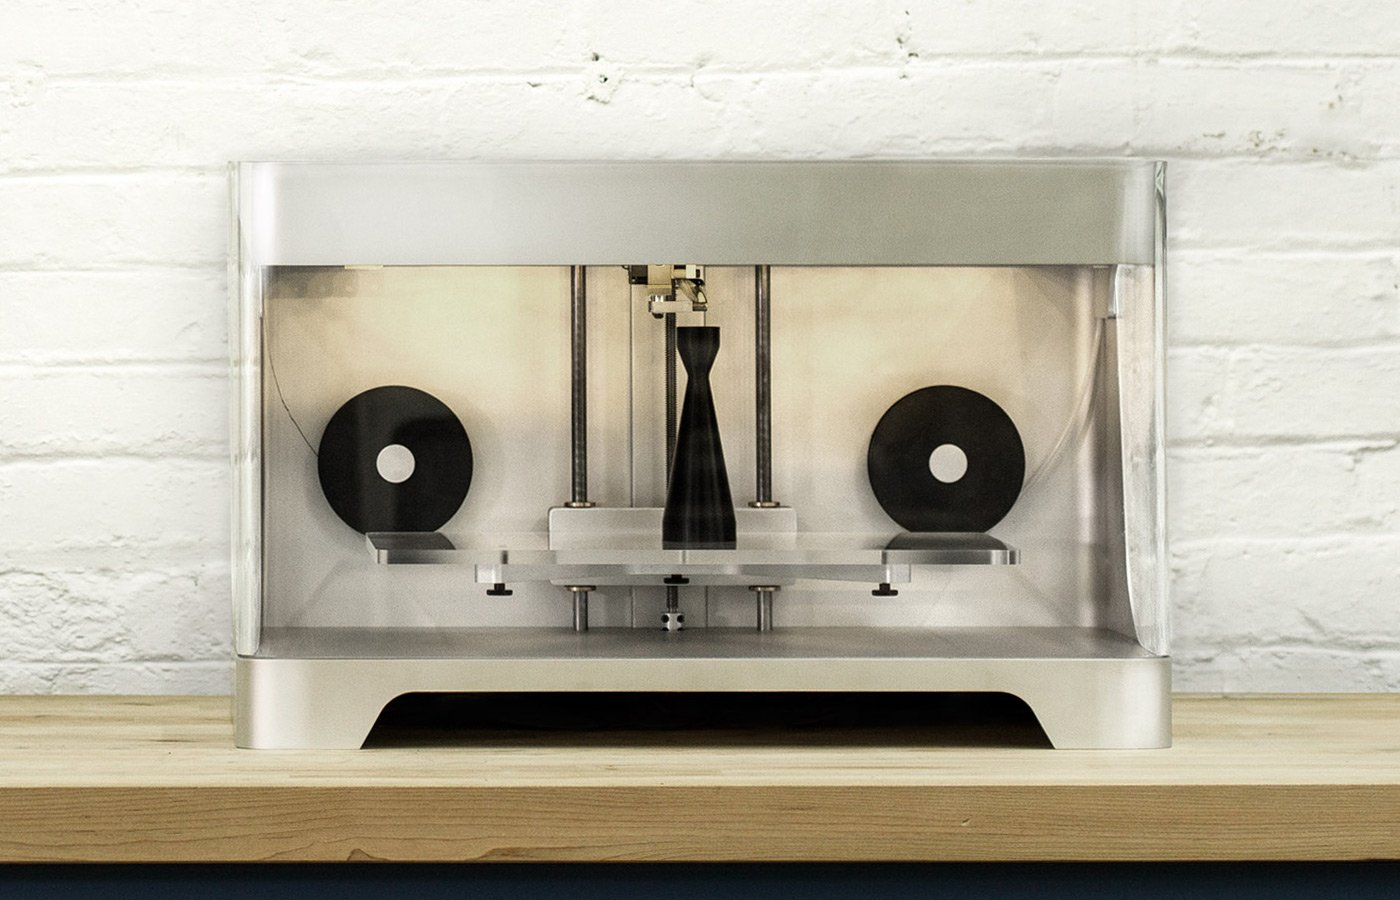  The Markforged Mark 2 carbon-fiber/nylon 3D printer is now available from 3D Hubs 